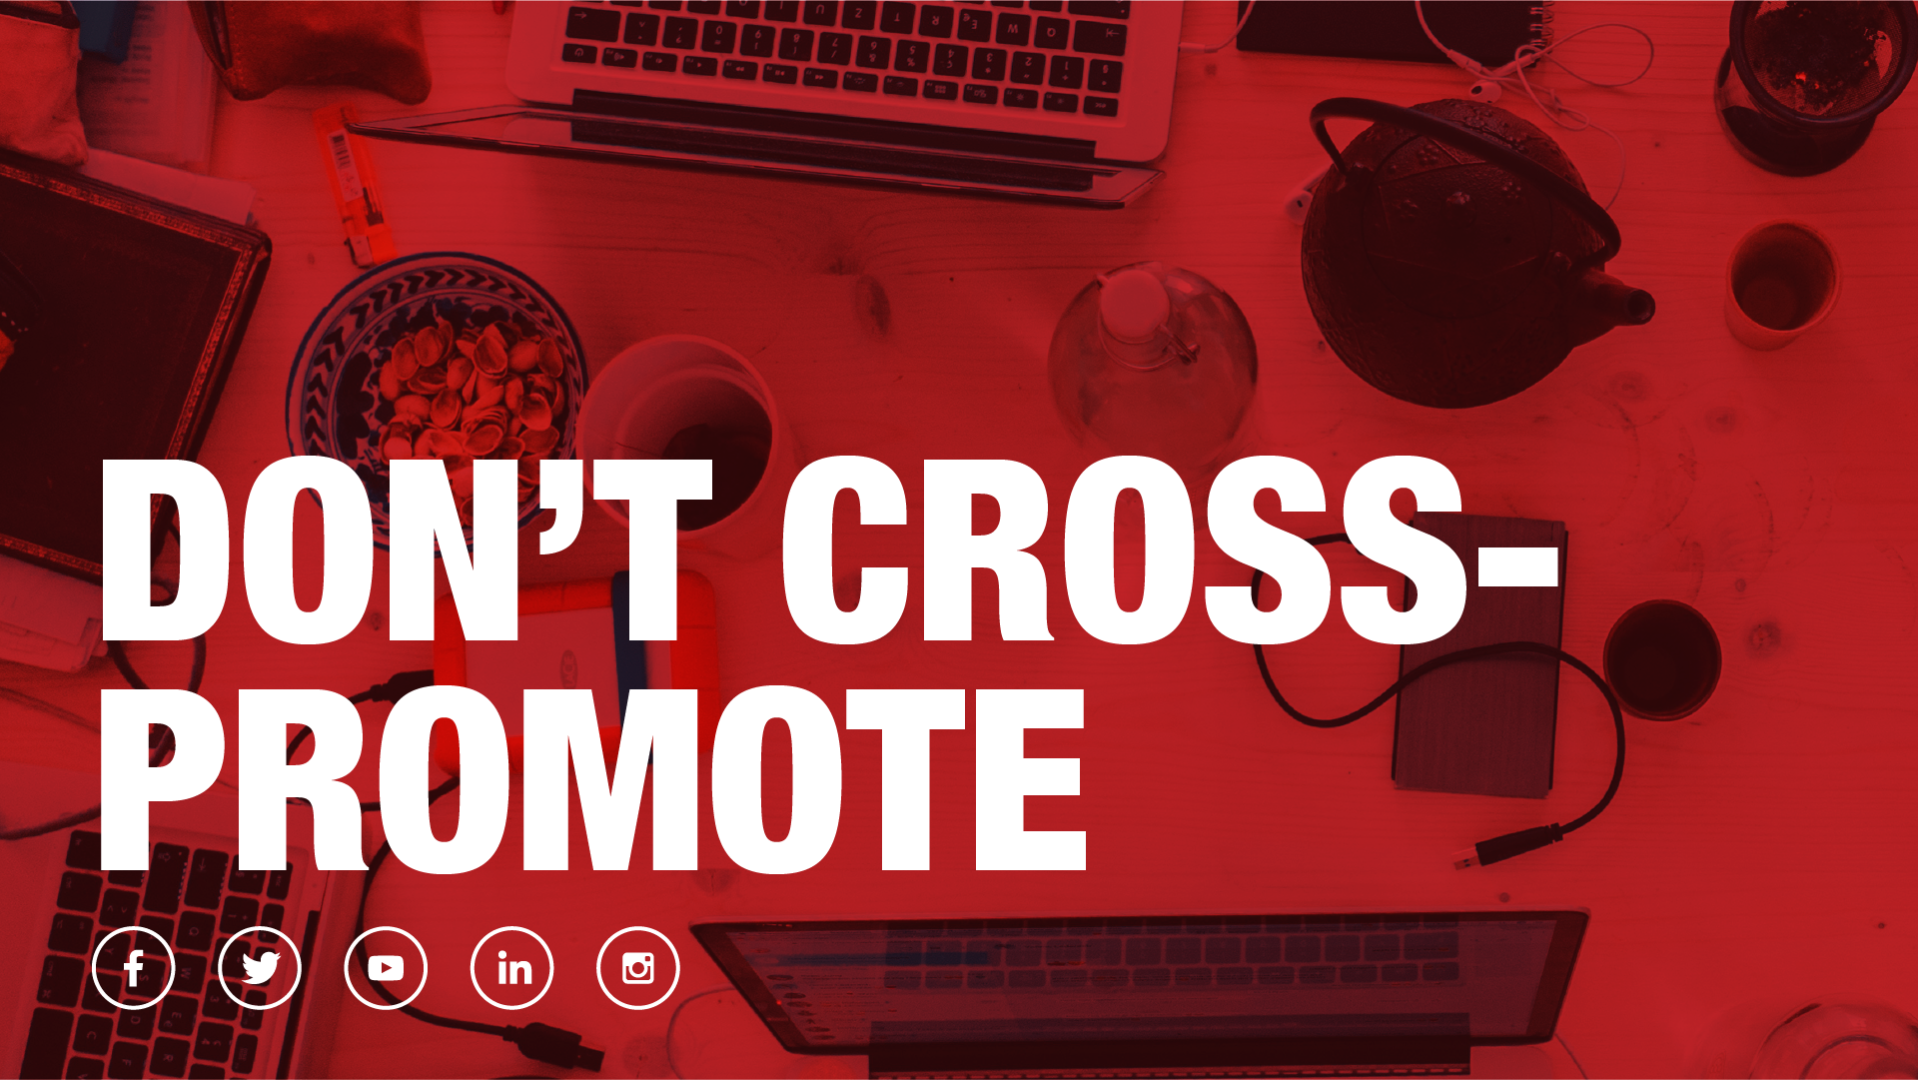 Don't cross promote content on social media